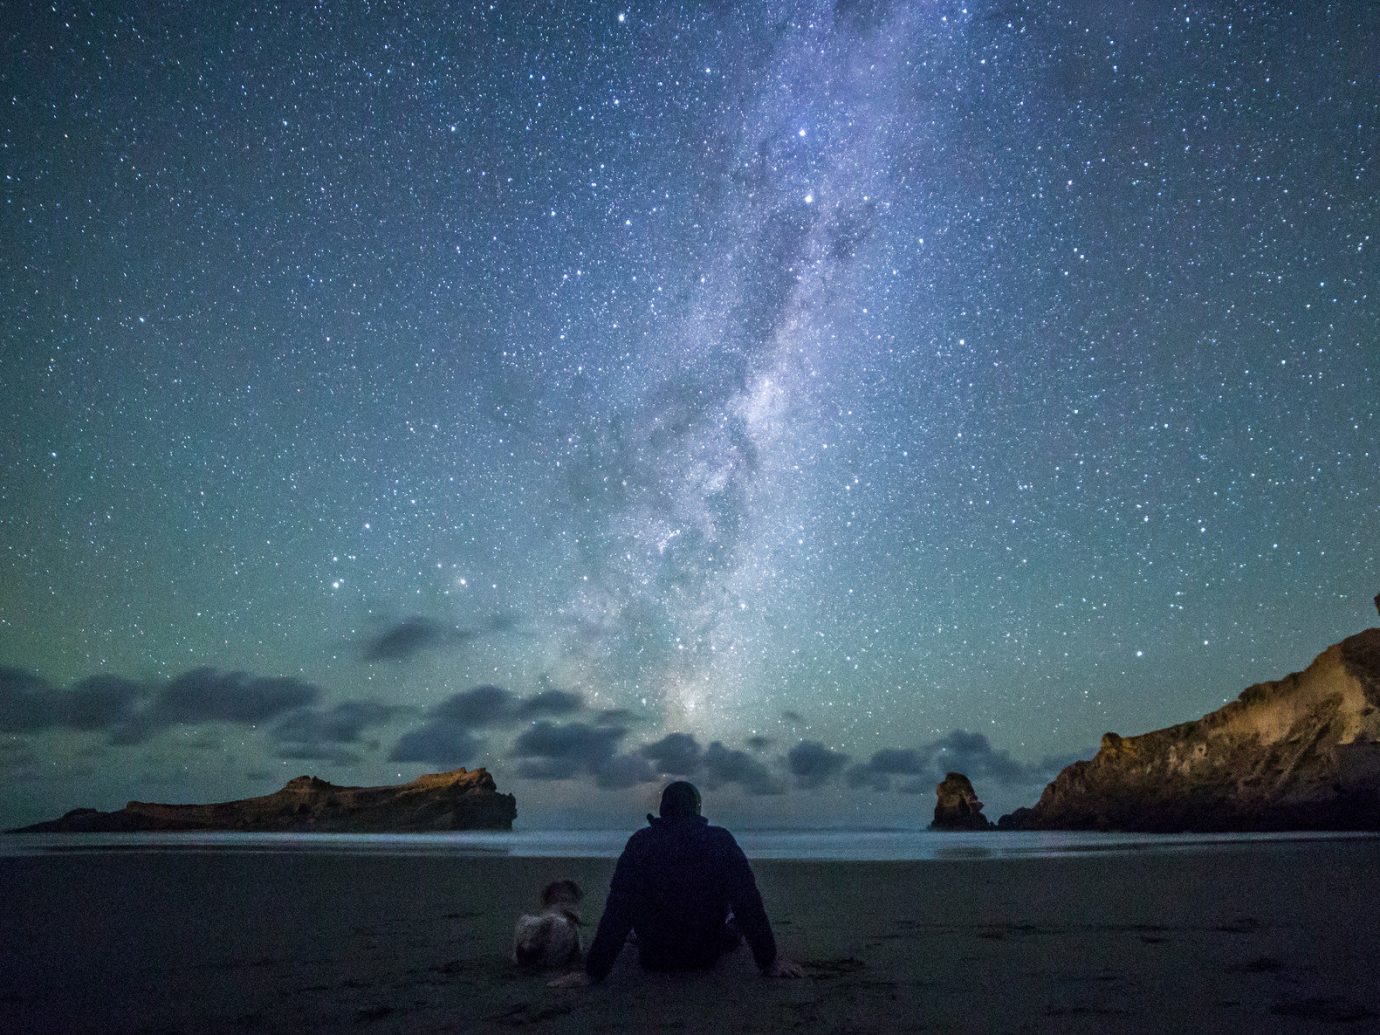 Beach calm isolation majestic Nature night Night Sky northern lights Ocean Oceania Outdoors people remote Rocks Scenic views serene silhouette star gazing stars Travel Tips Trip Ideas water outdoor sky galaxy astronomical object star astronomy Sea moonlight milky way